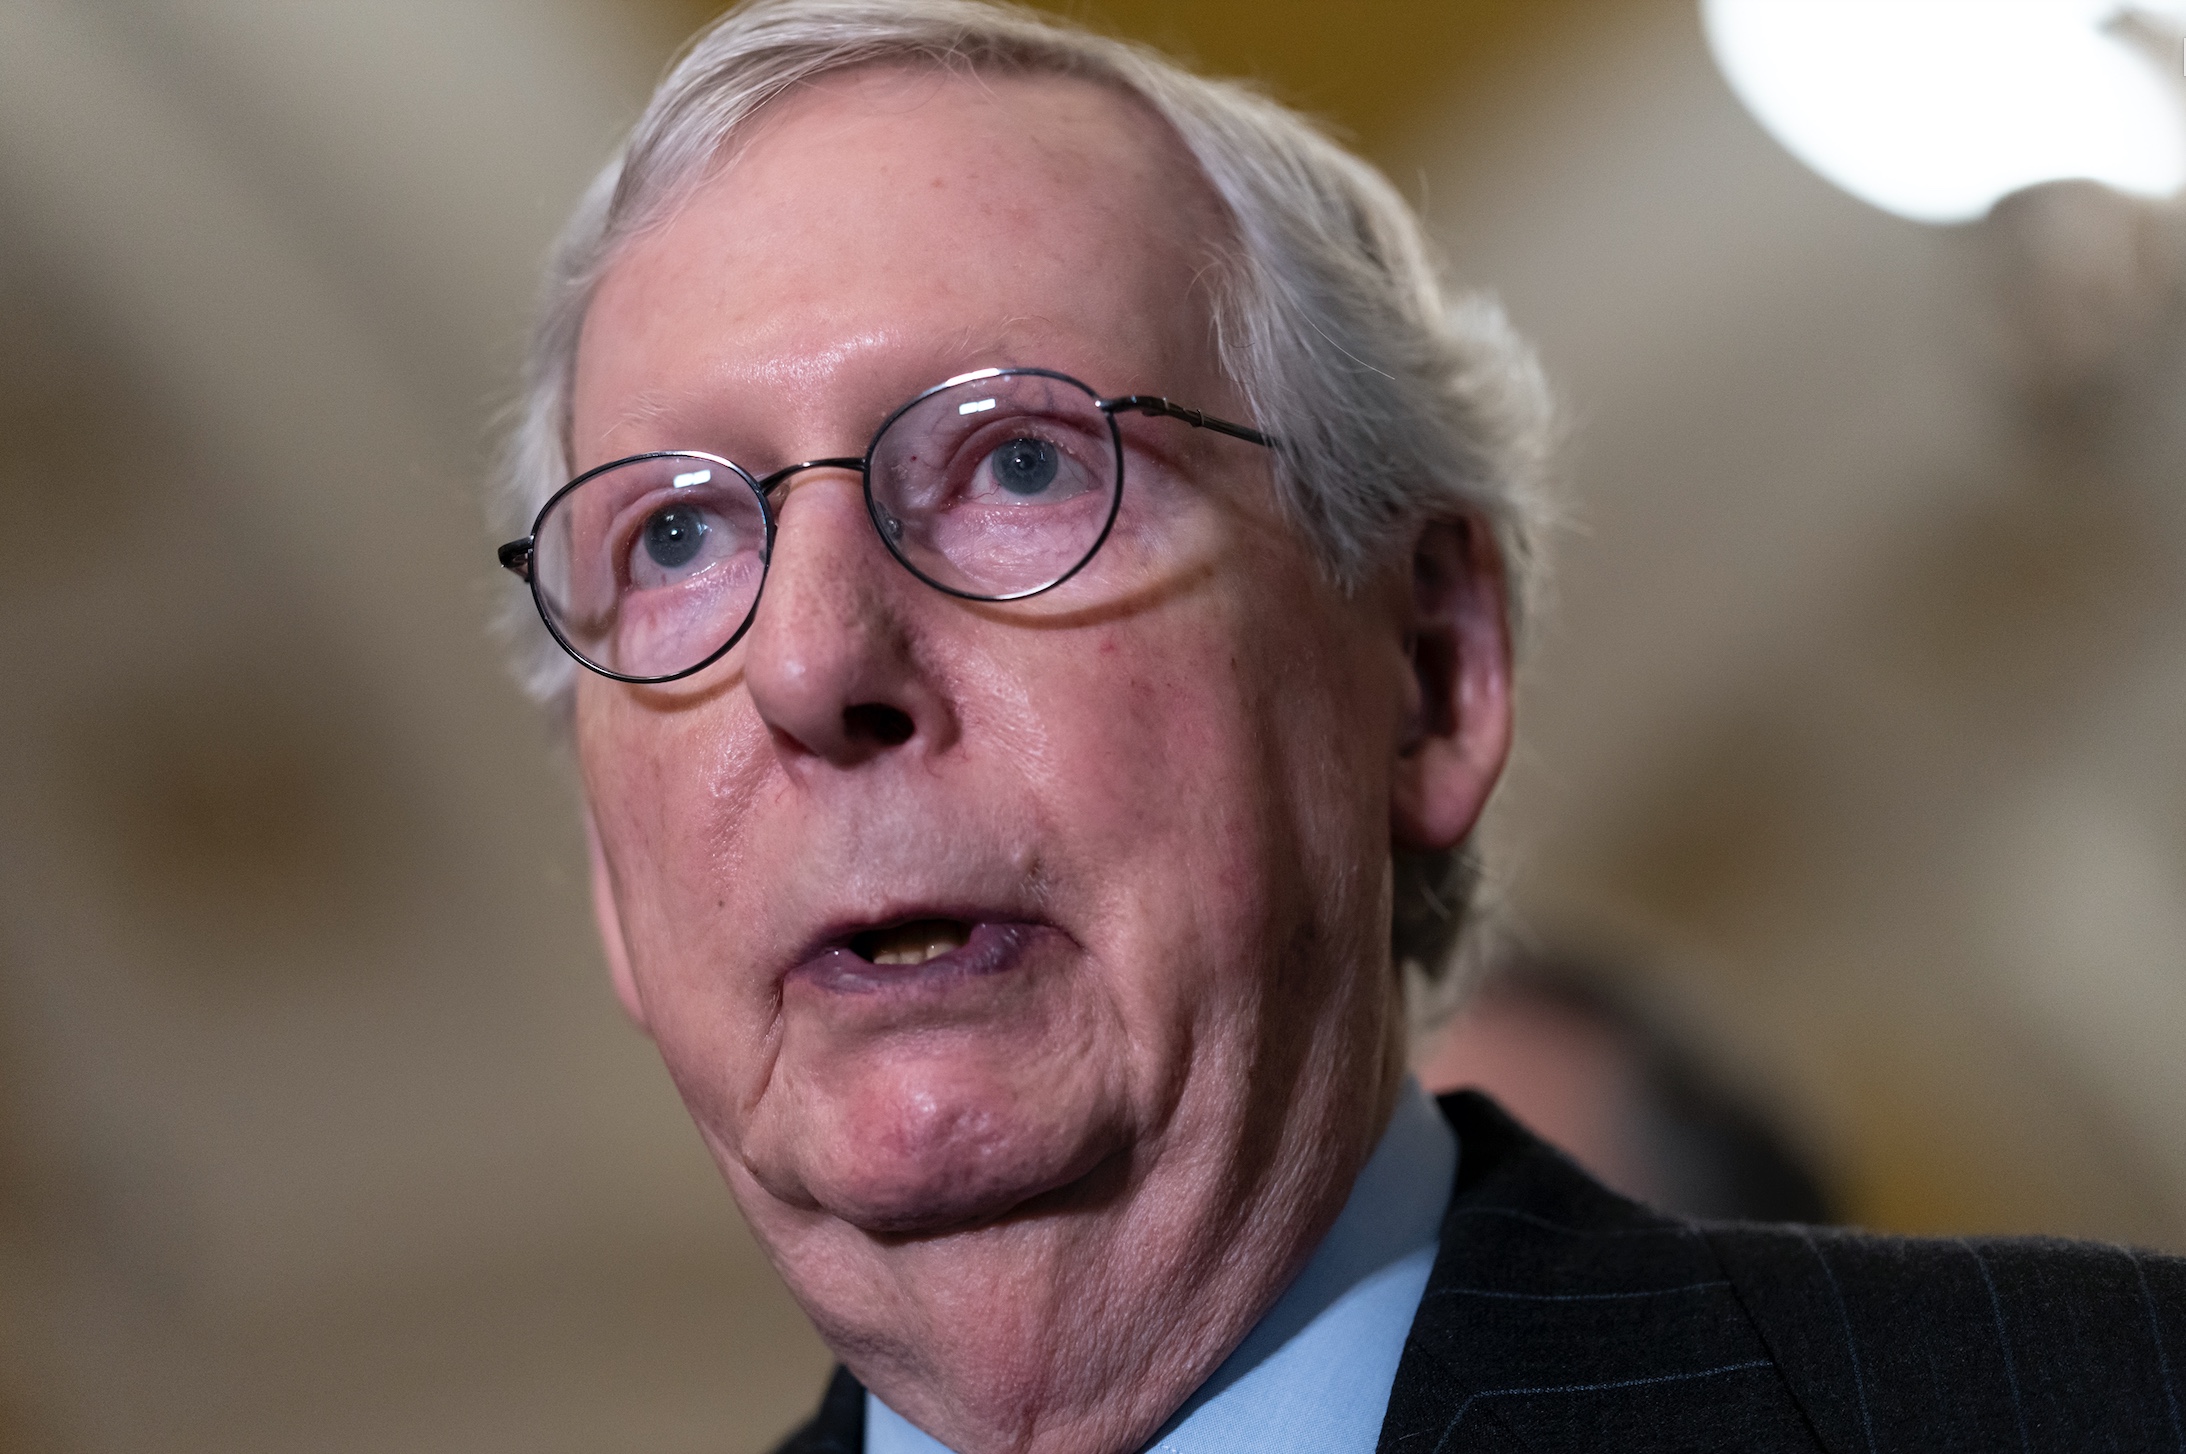 Mitch Mcconnell To Step Down As Senate Republican Leader In November